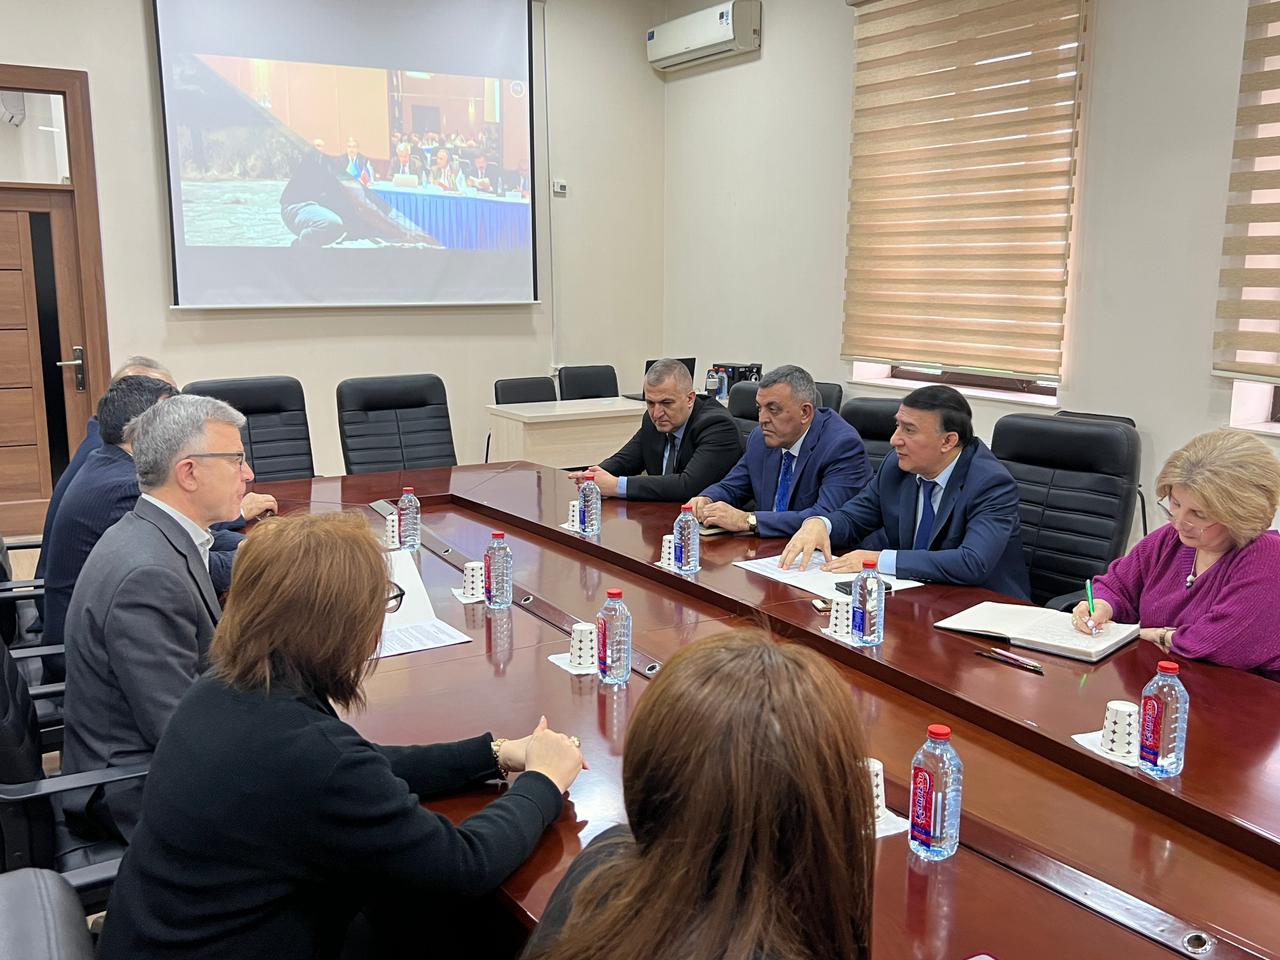 Western Caspian University will partner with the Aerospace Agency's Institute of Ecology